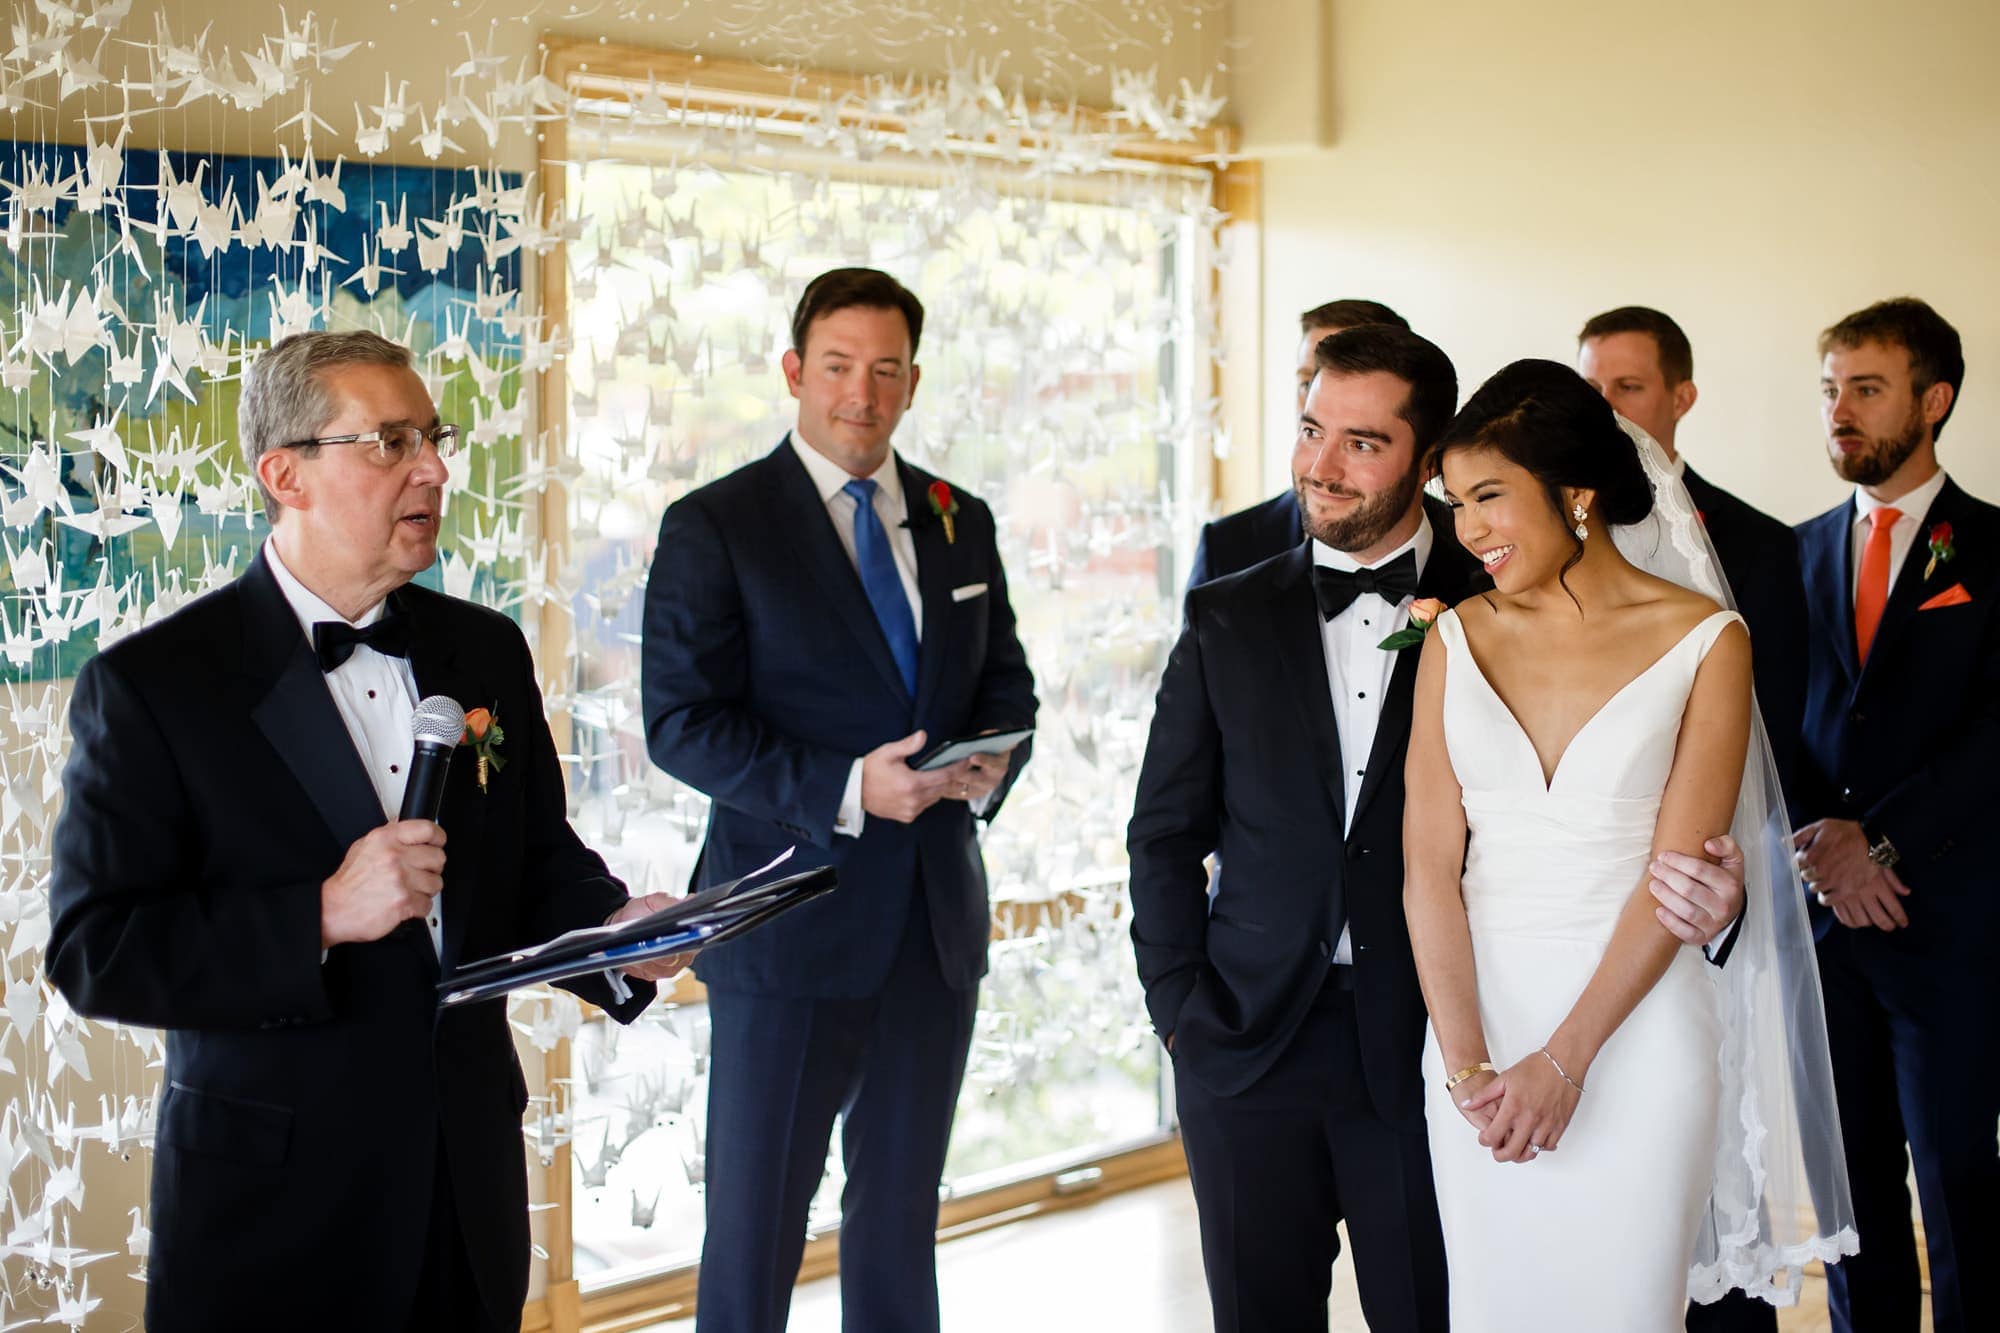 The father of the groom reads a passage during Megan and Bryan's wedding at Rembrandt Yard